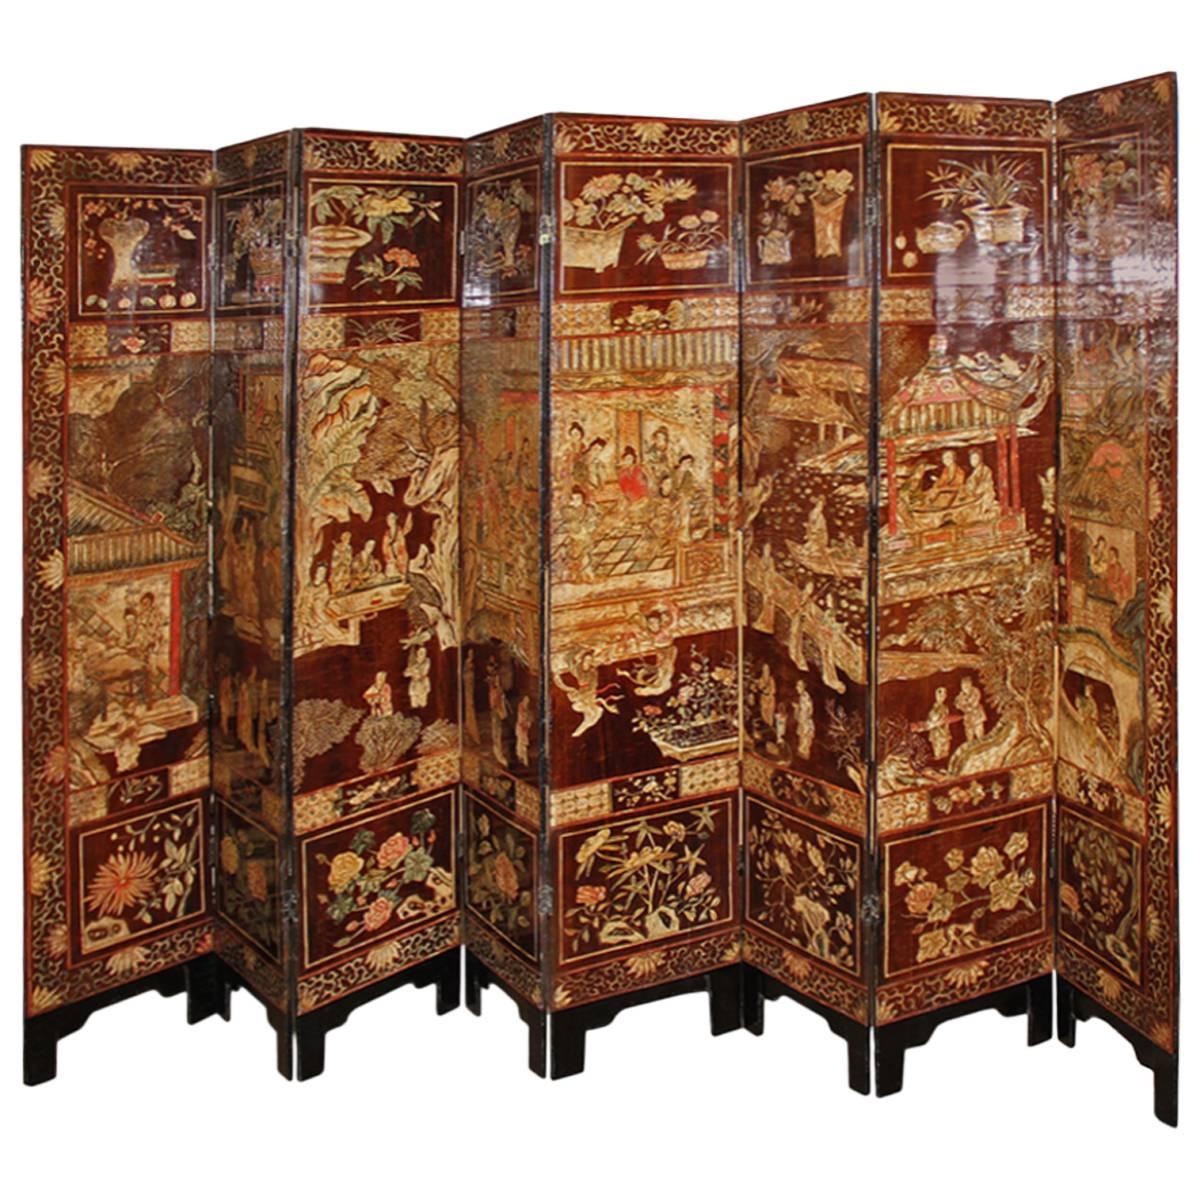 Late 18th Century Chinese Export Sang de Boef Lacquer Screen For Sale